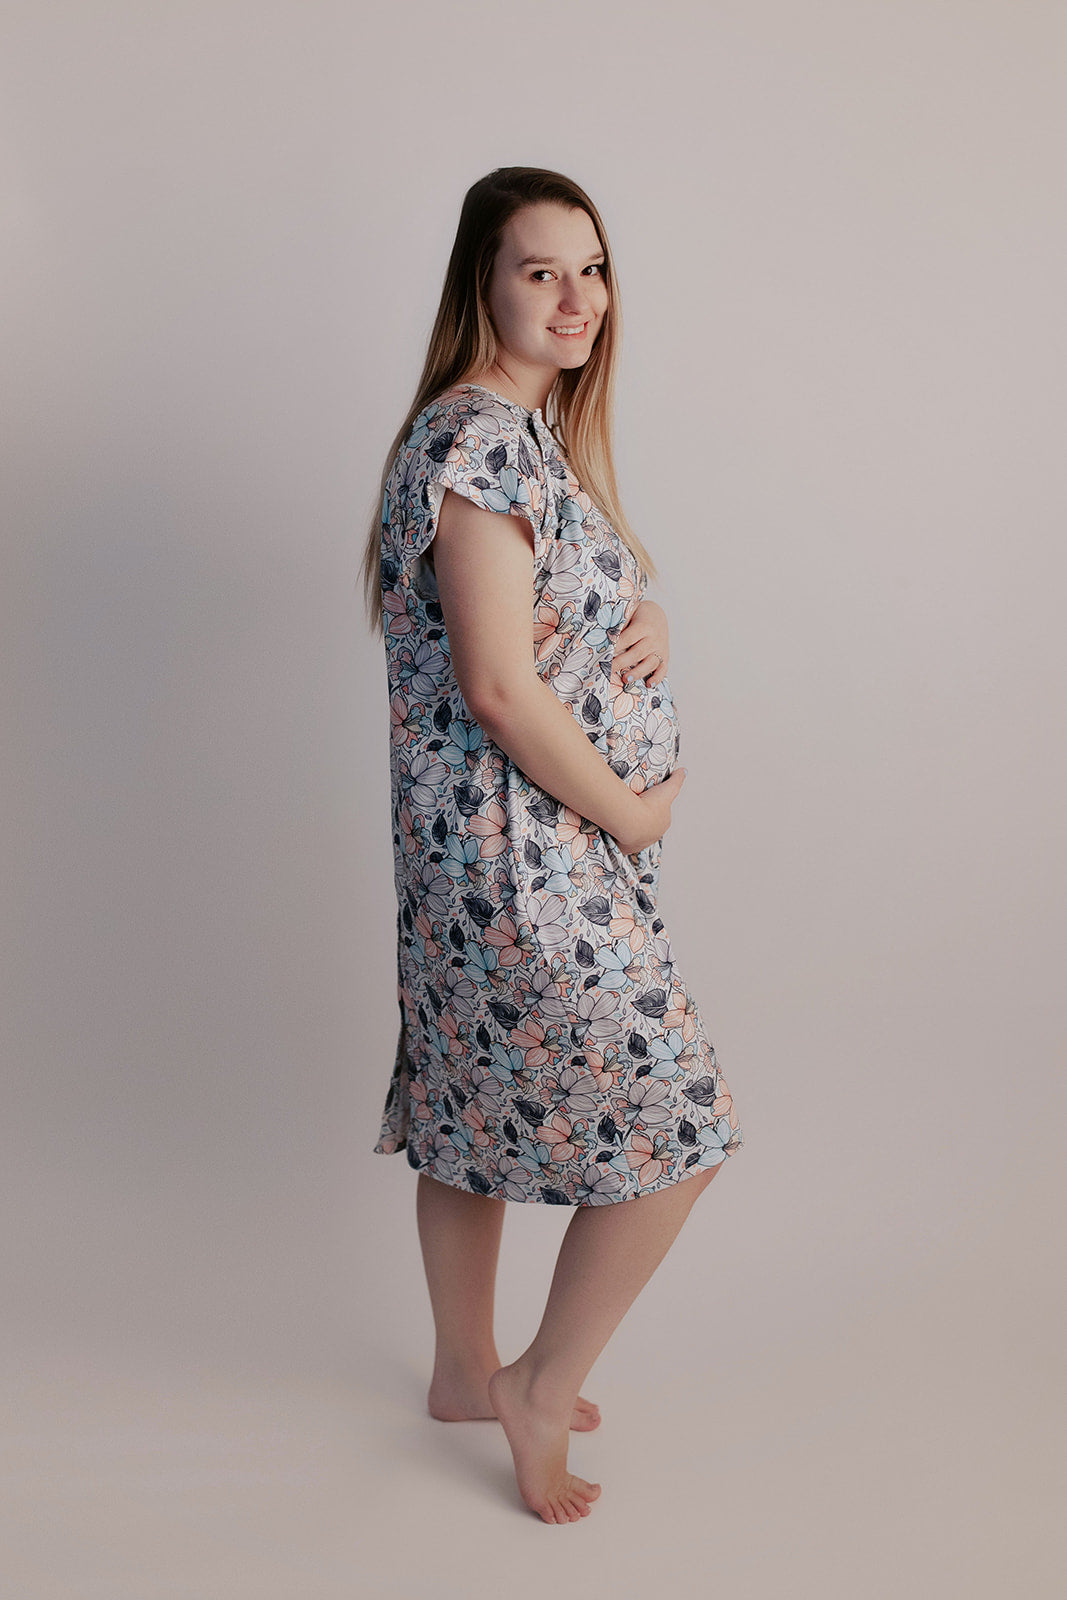 Labor & Delivery Gown